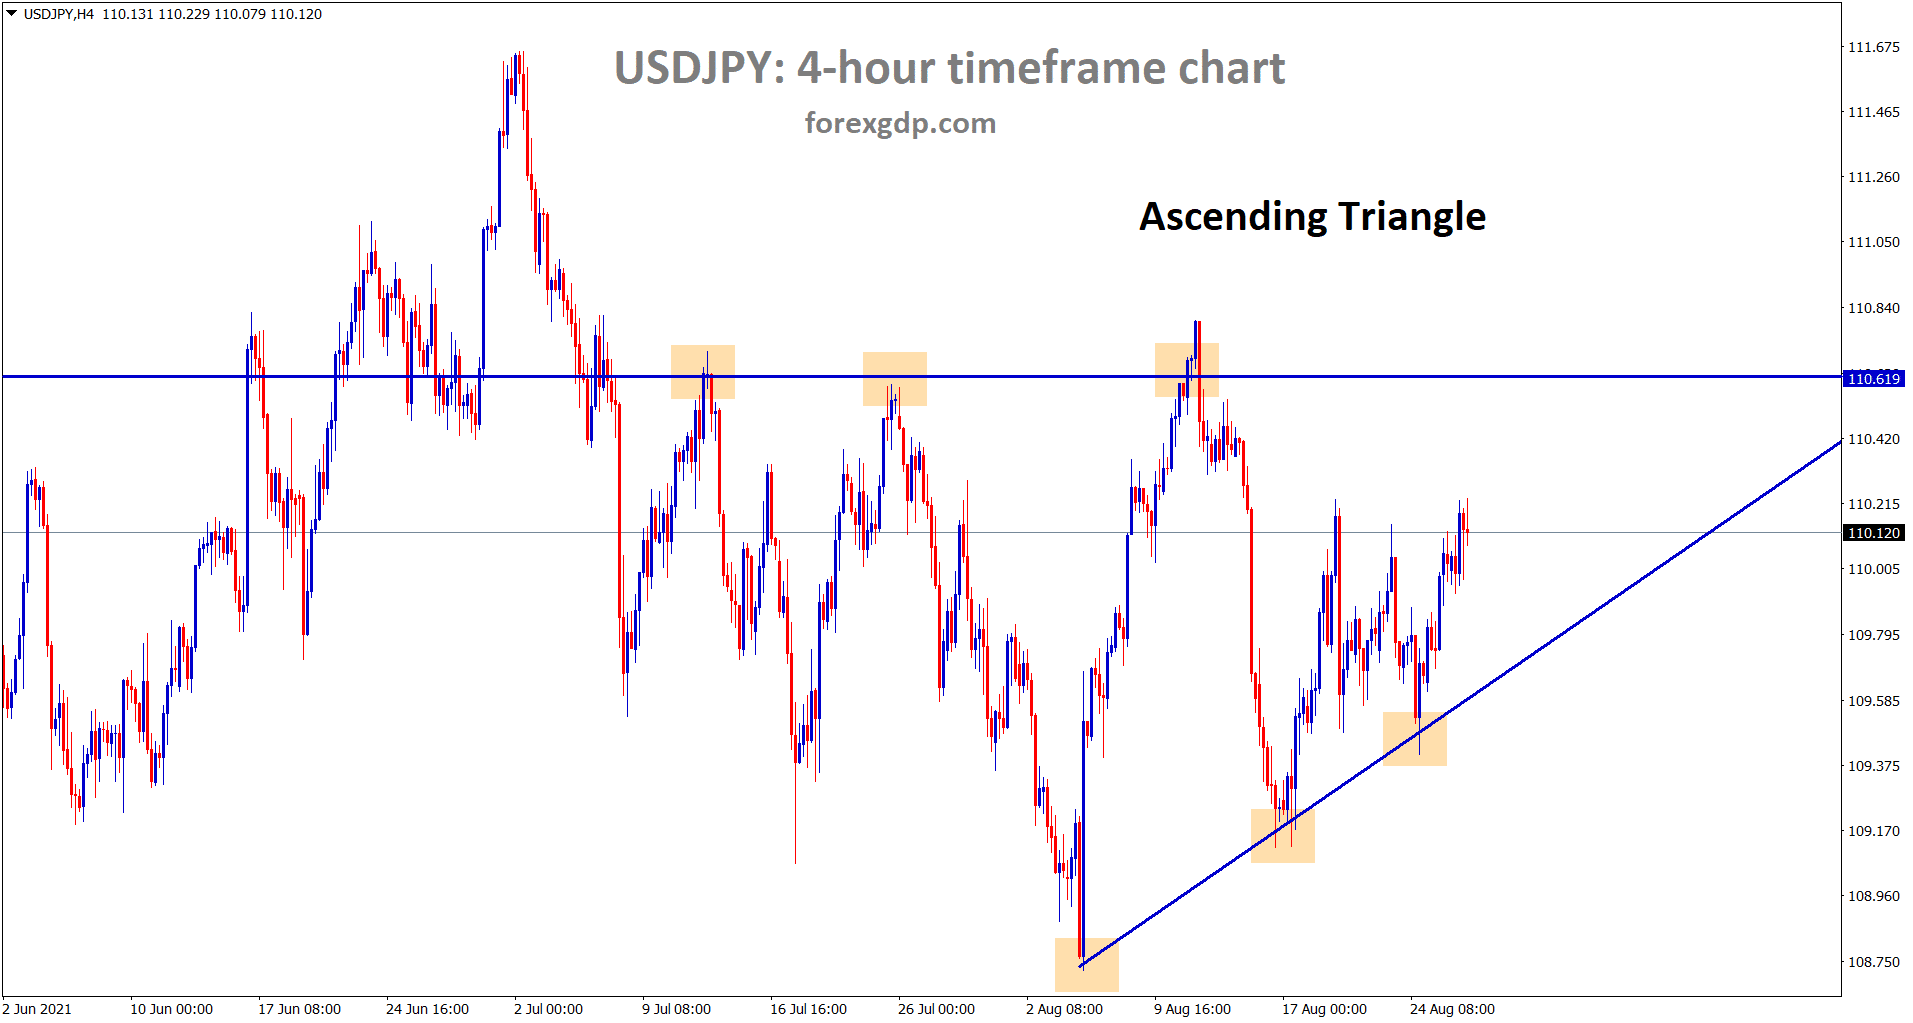 USDJPY is moving in an Ascending Triangle pattern